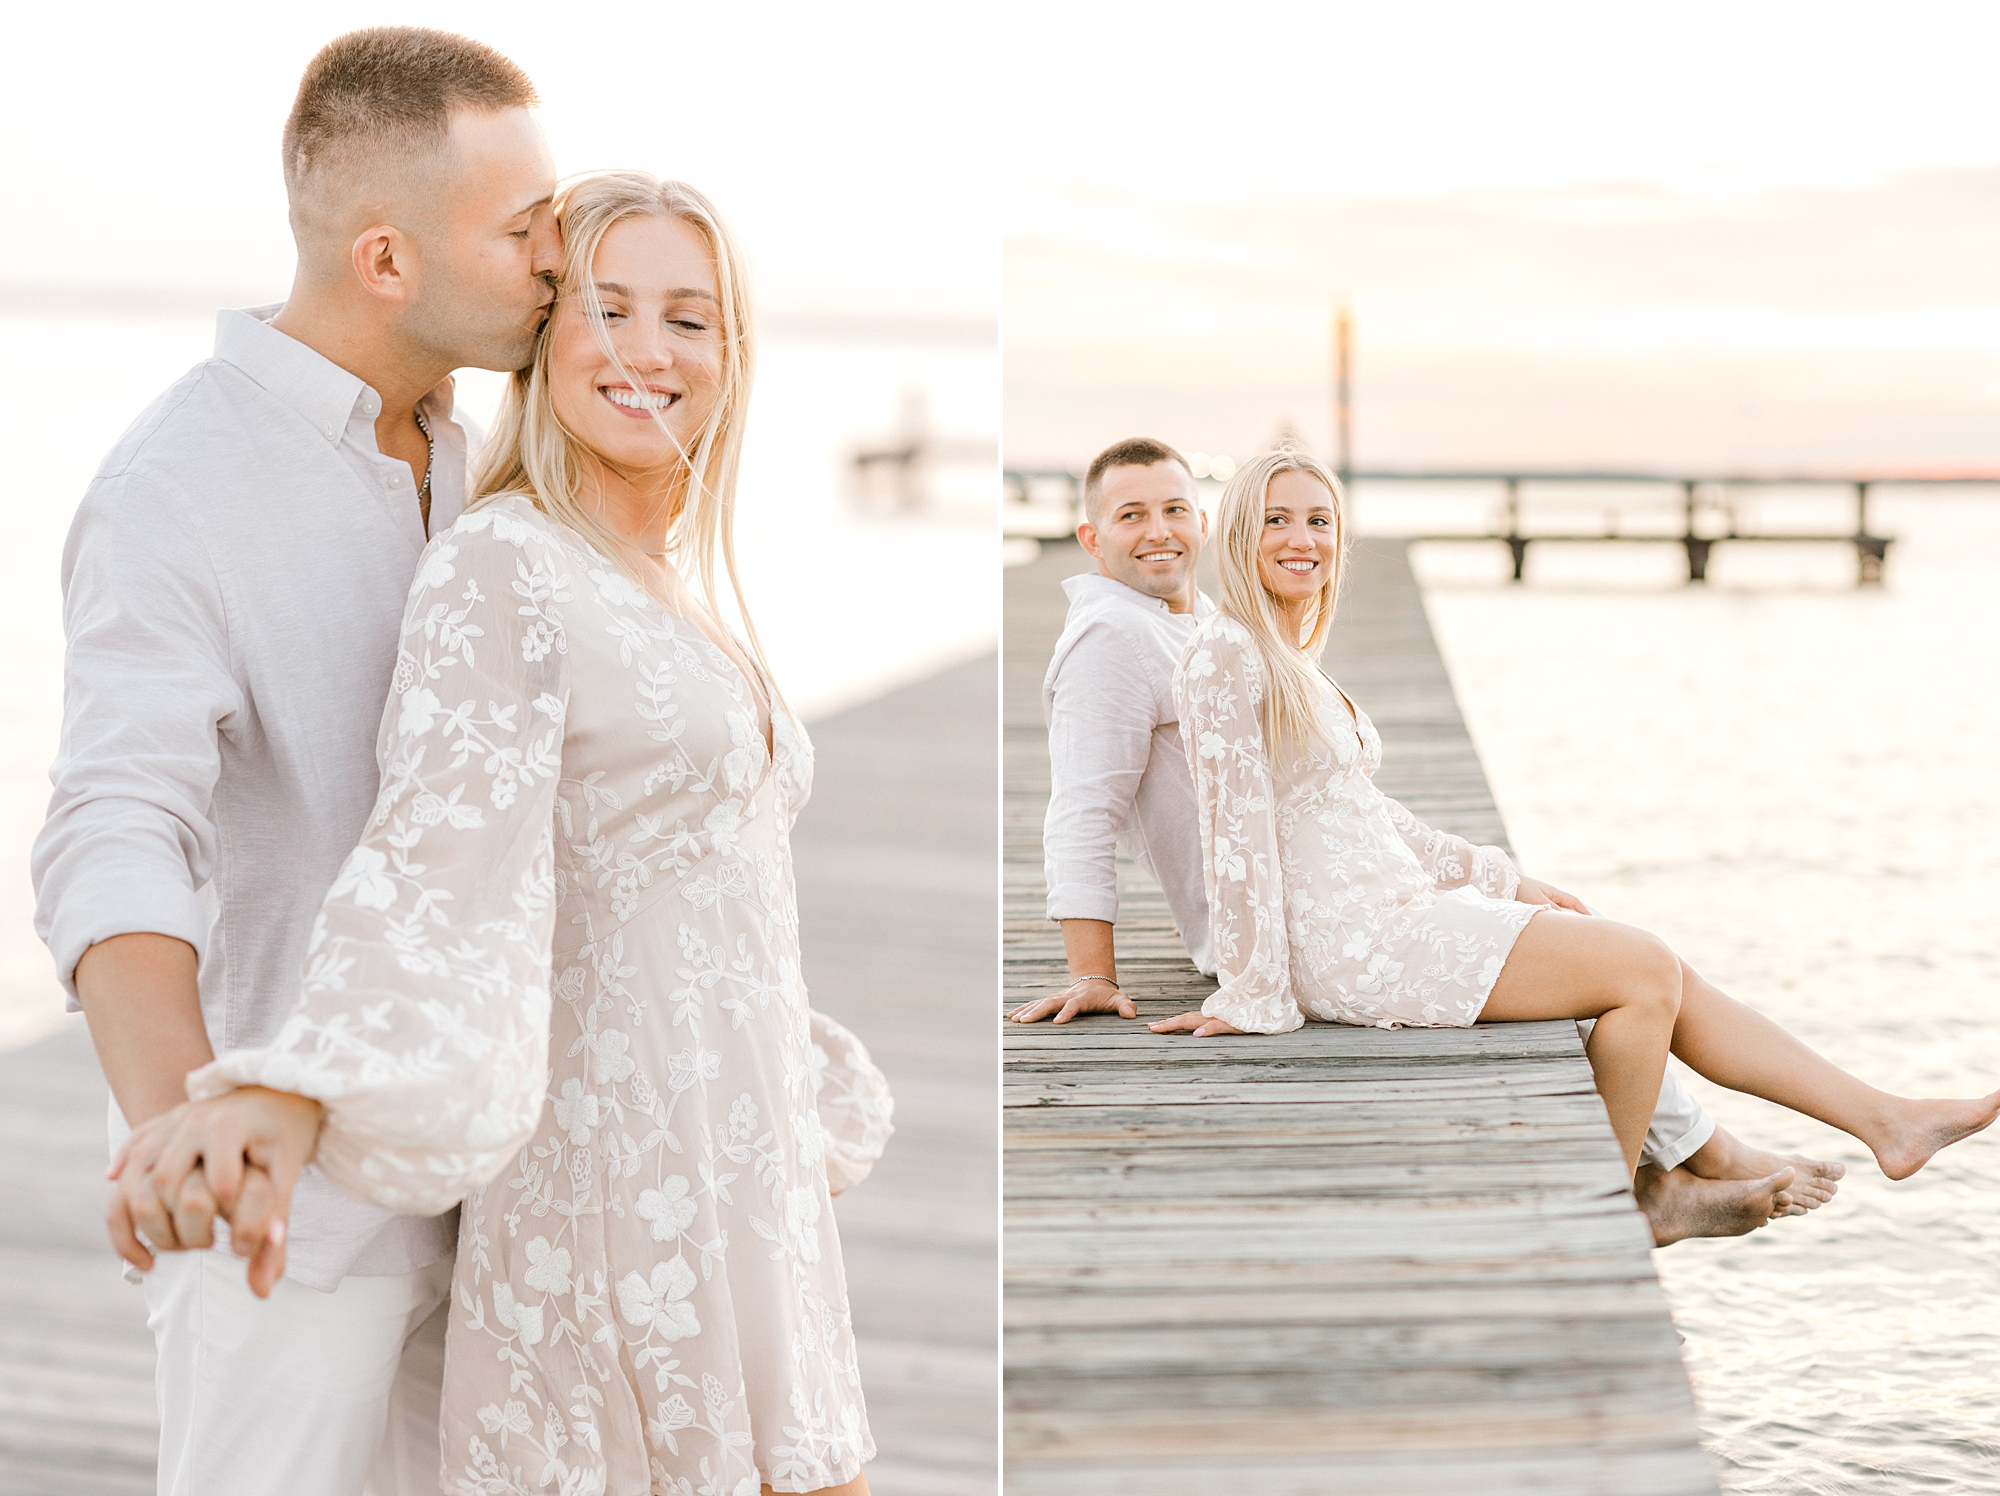 engaged couple hugs on wooden dock at sunset during engagement session in Lavallette, NJ along the bay